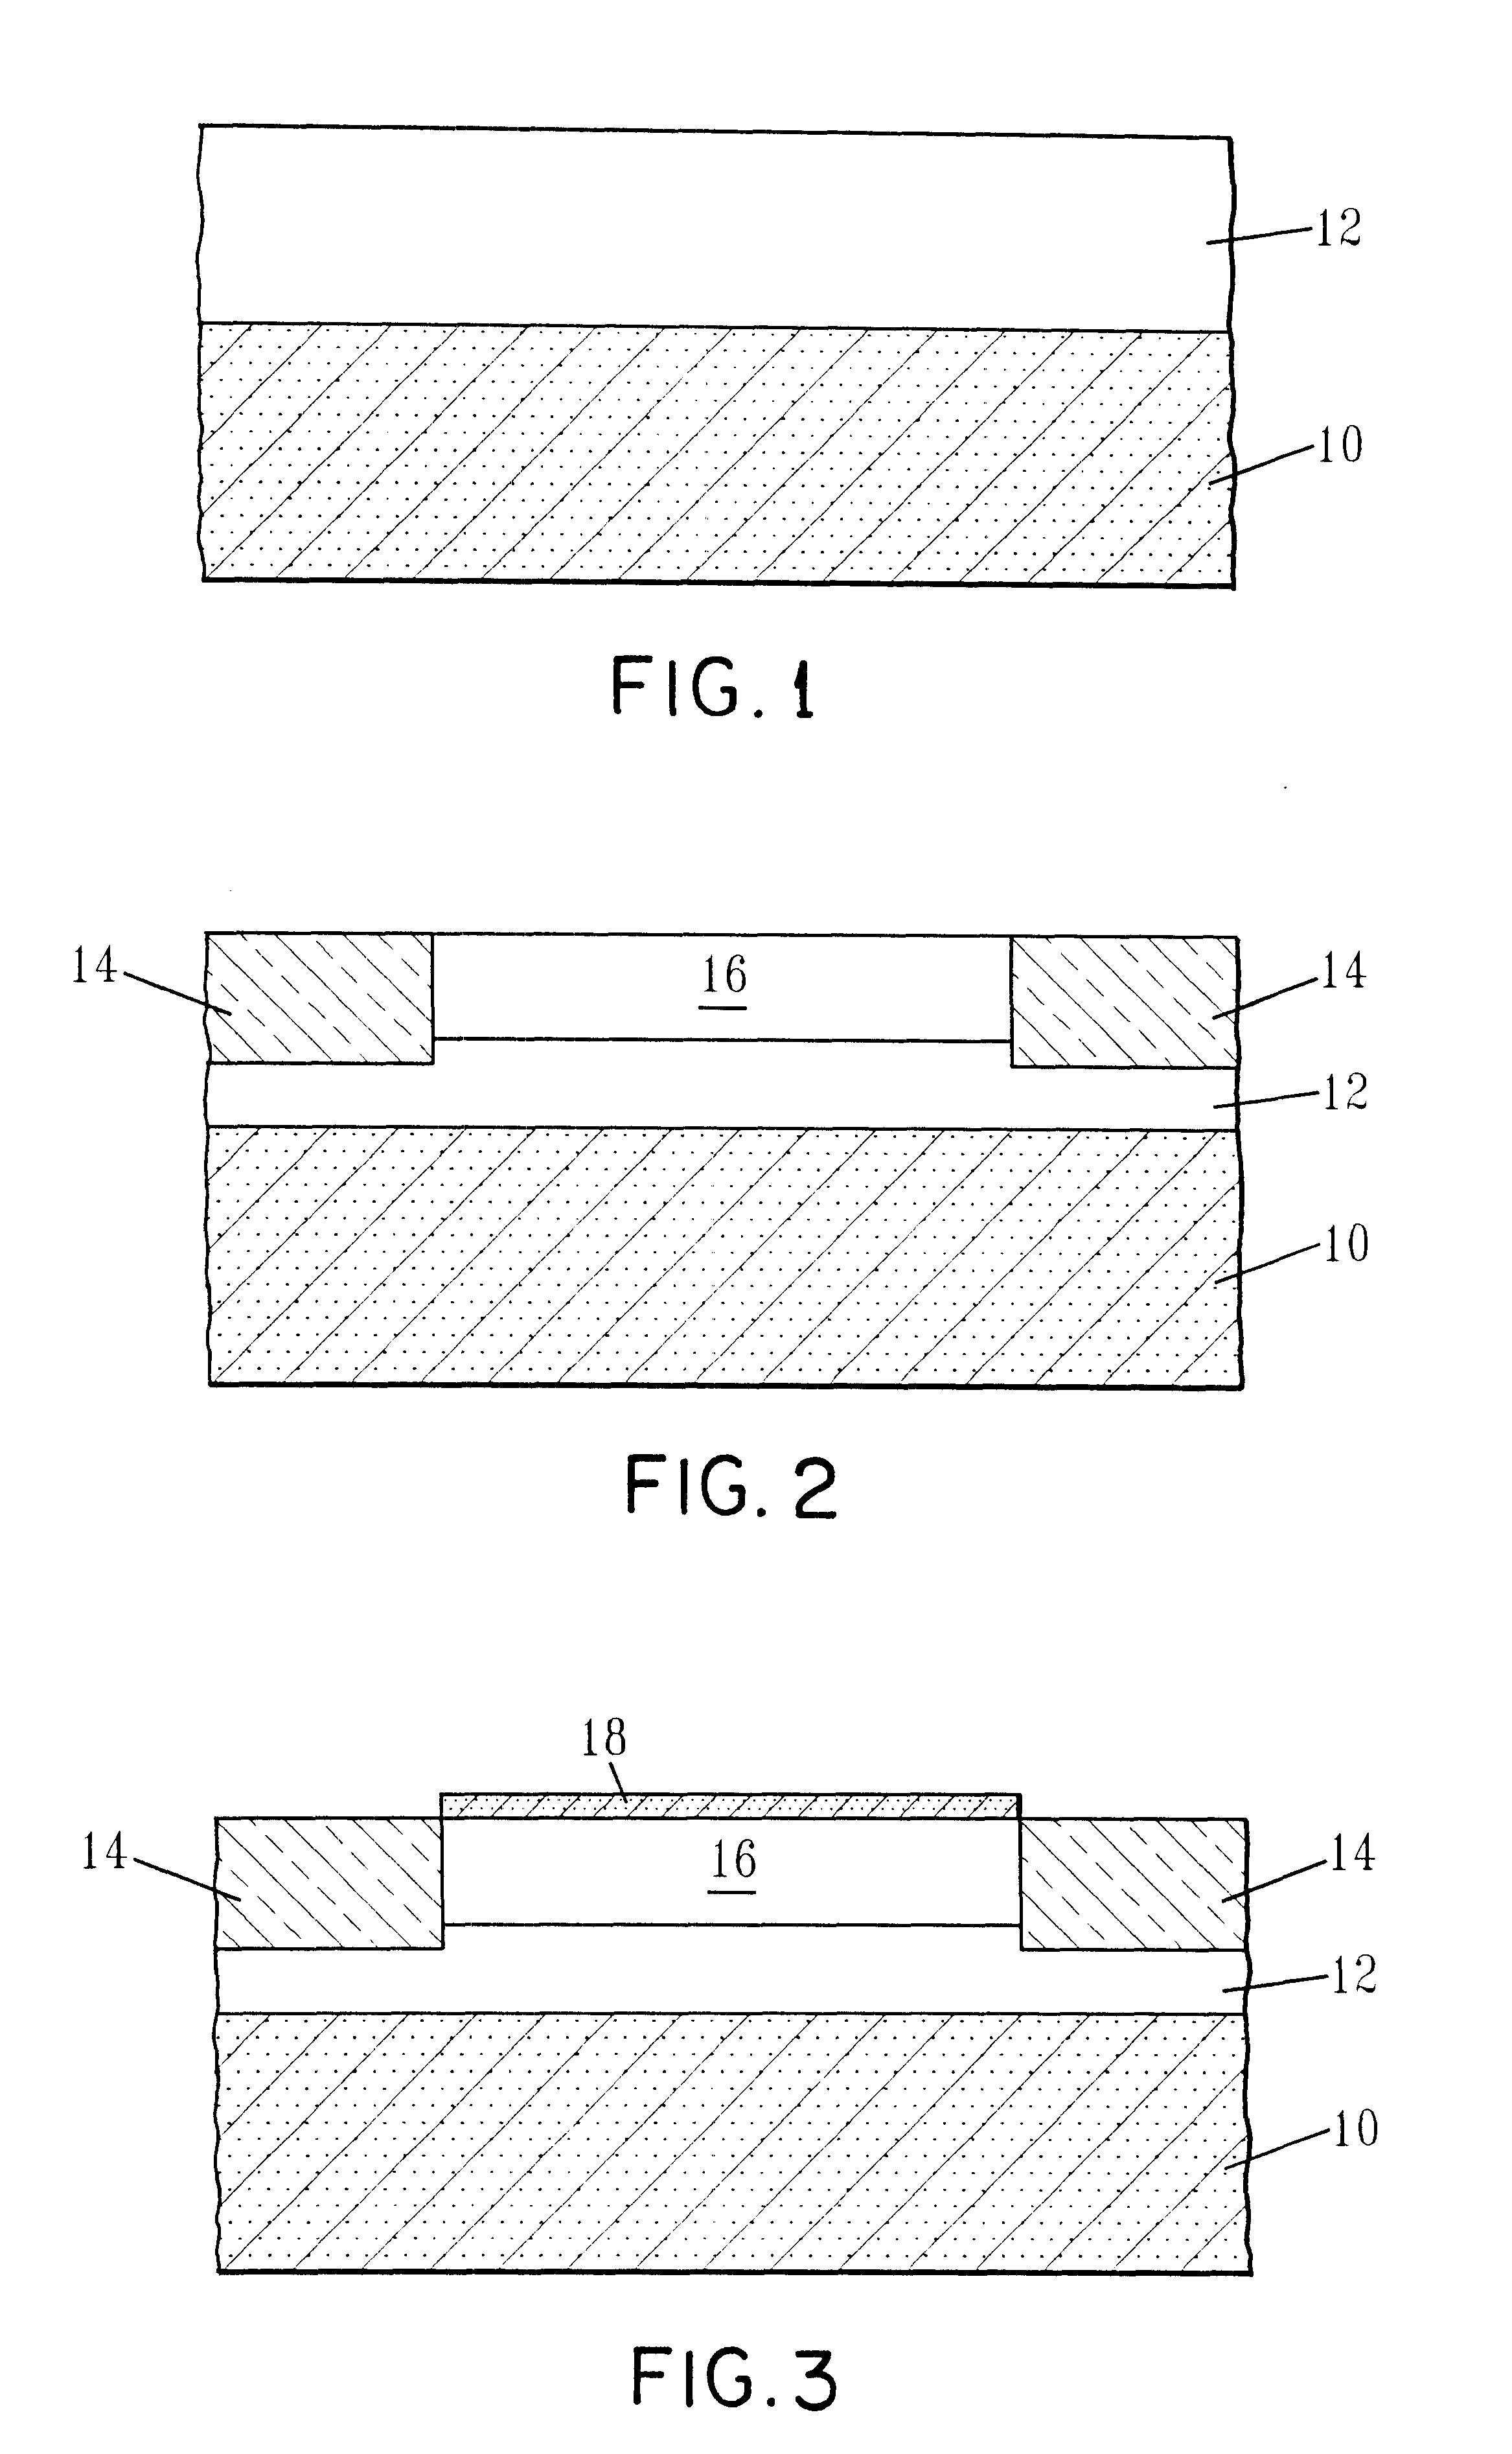 Method to fabricate a strained Si CMOS structure using selective epitaxial deposition of Si after device isolation formation